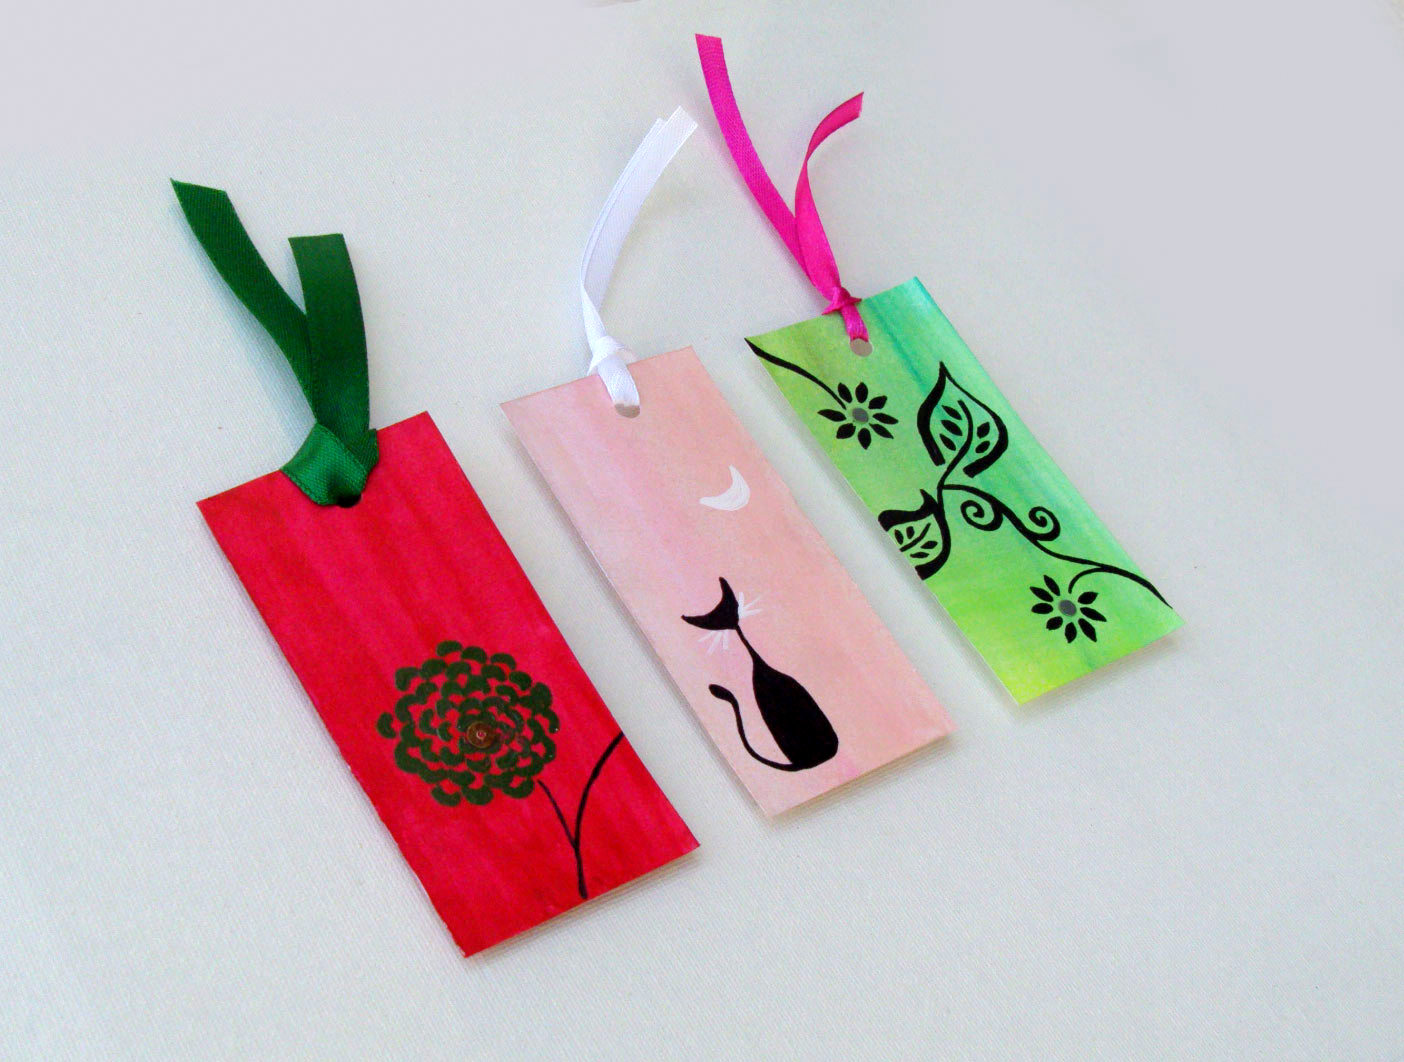 Free Information and News about Handmade Gifts - Handmade Bookmarks - Handmade Gifts India Online - Handmade Giftables for sale